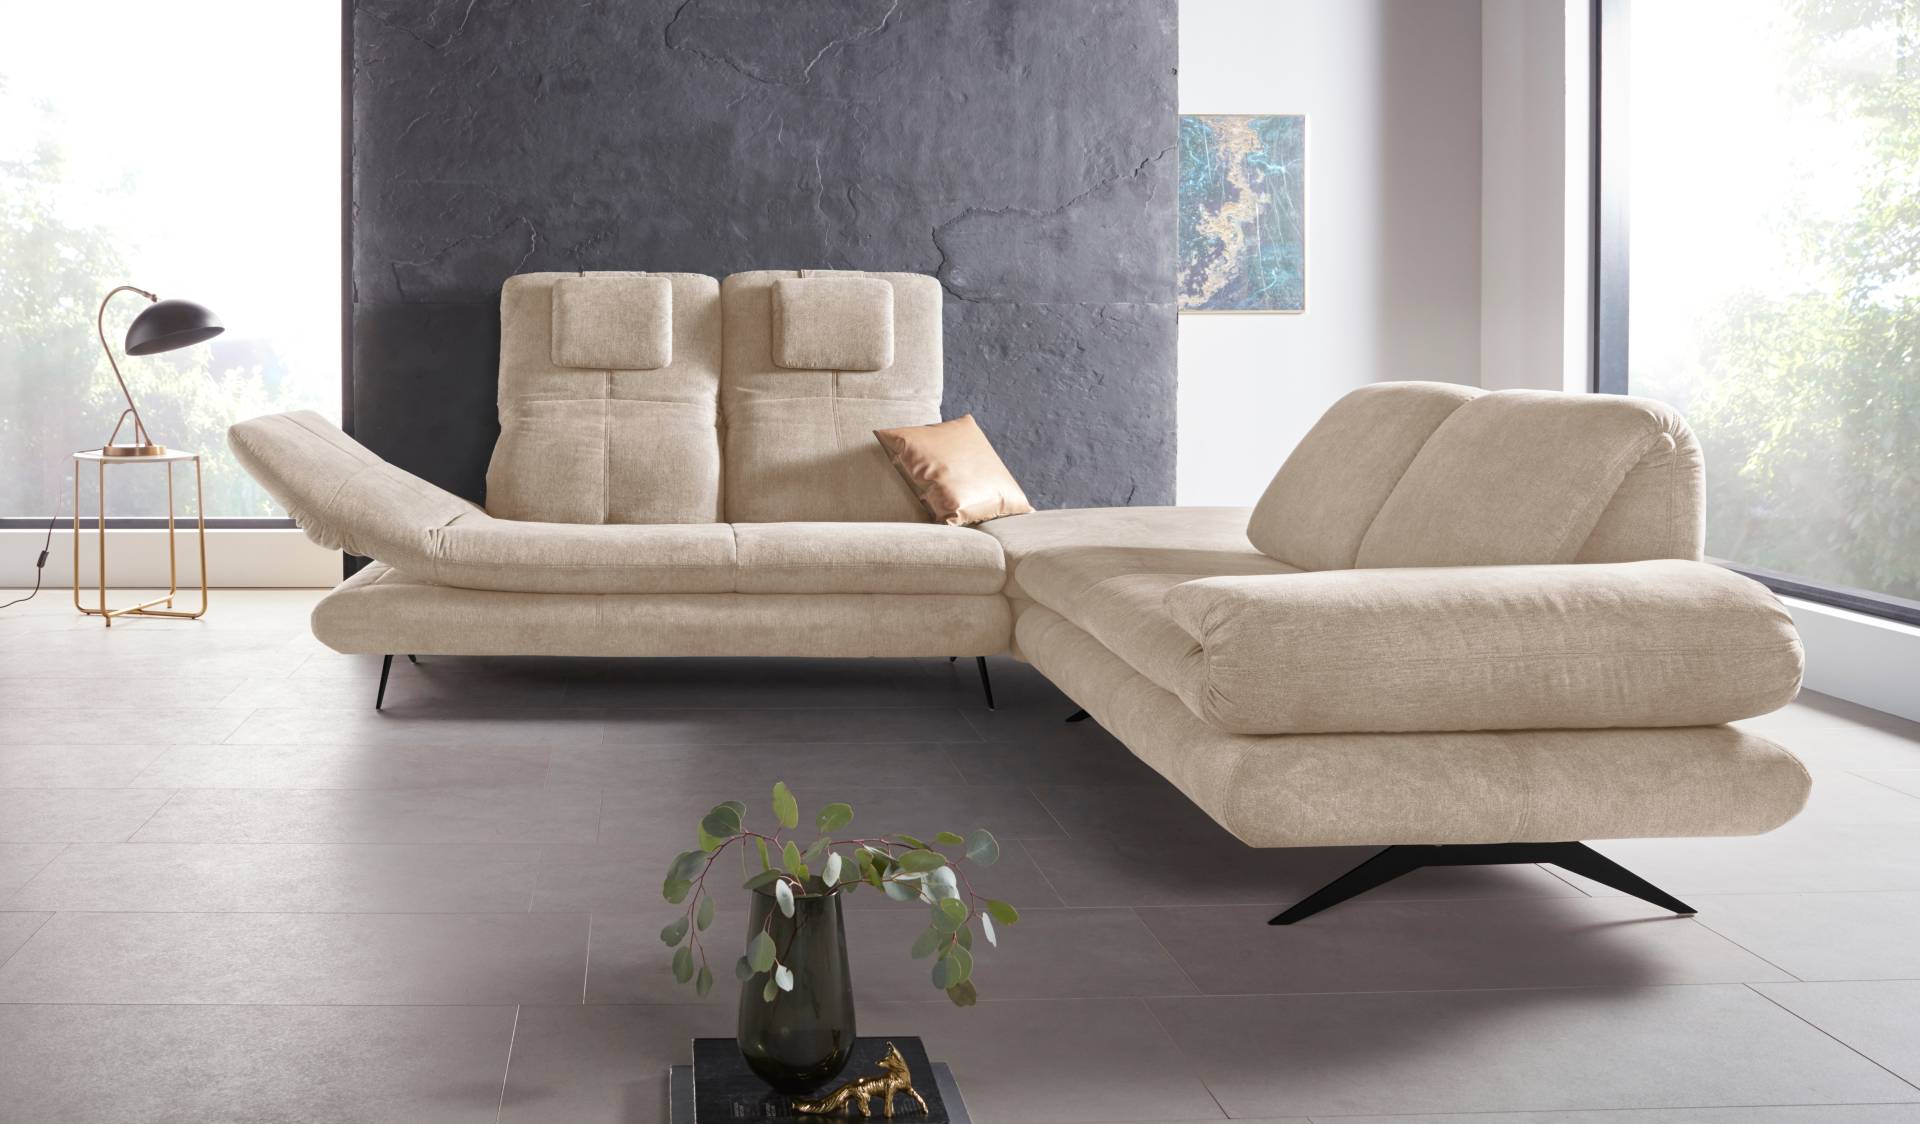 Places of Style Ecksofa »Milano L-Form« von PLACES OF STYLE